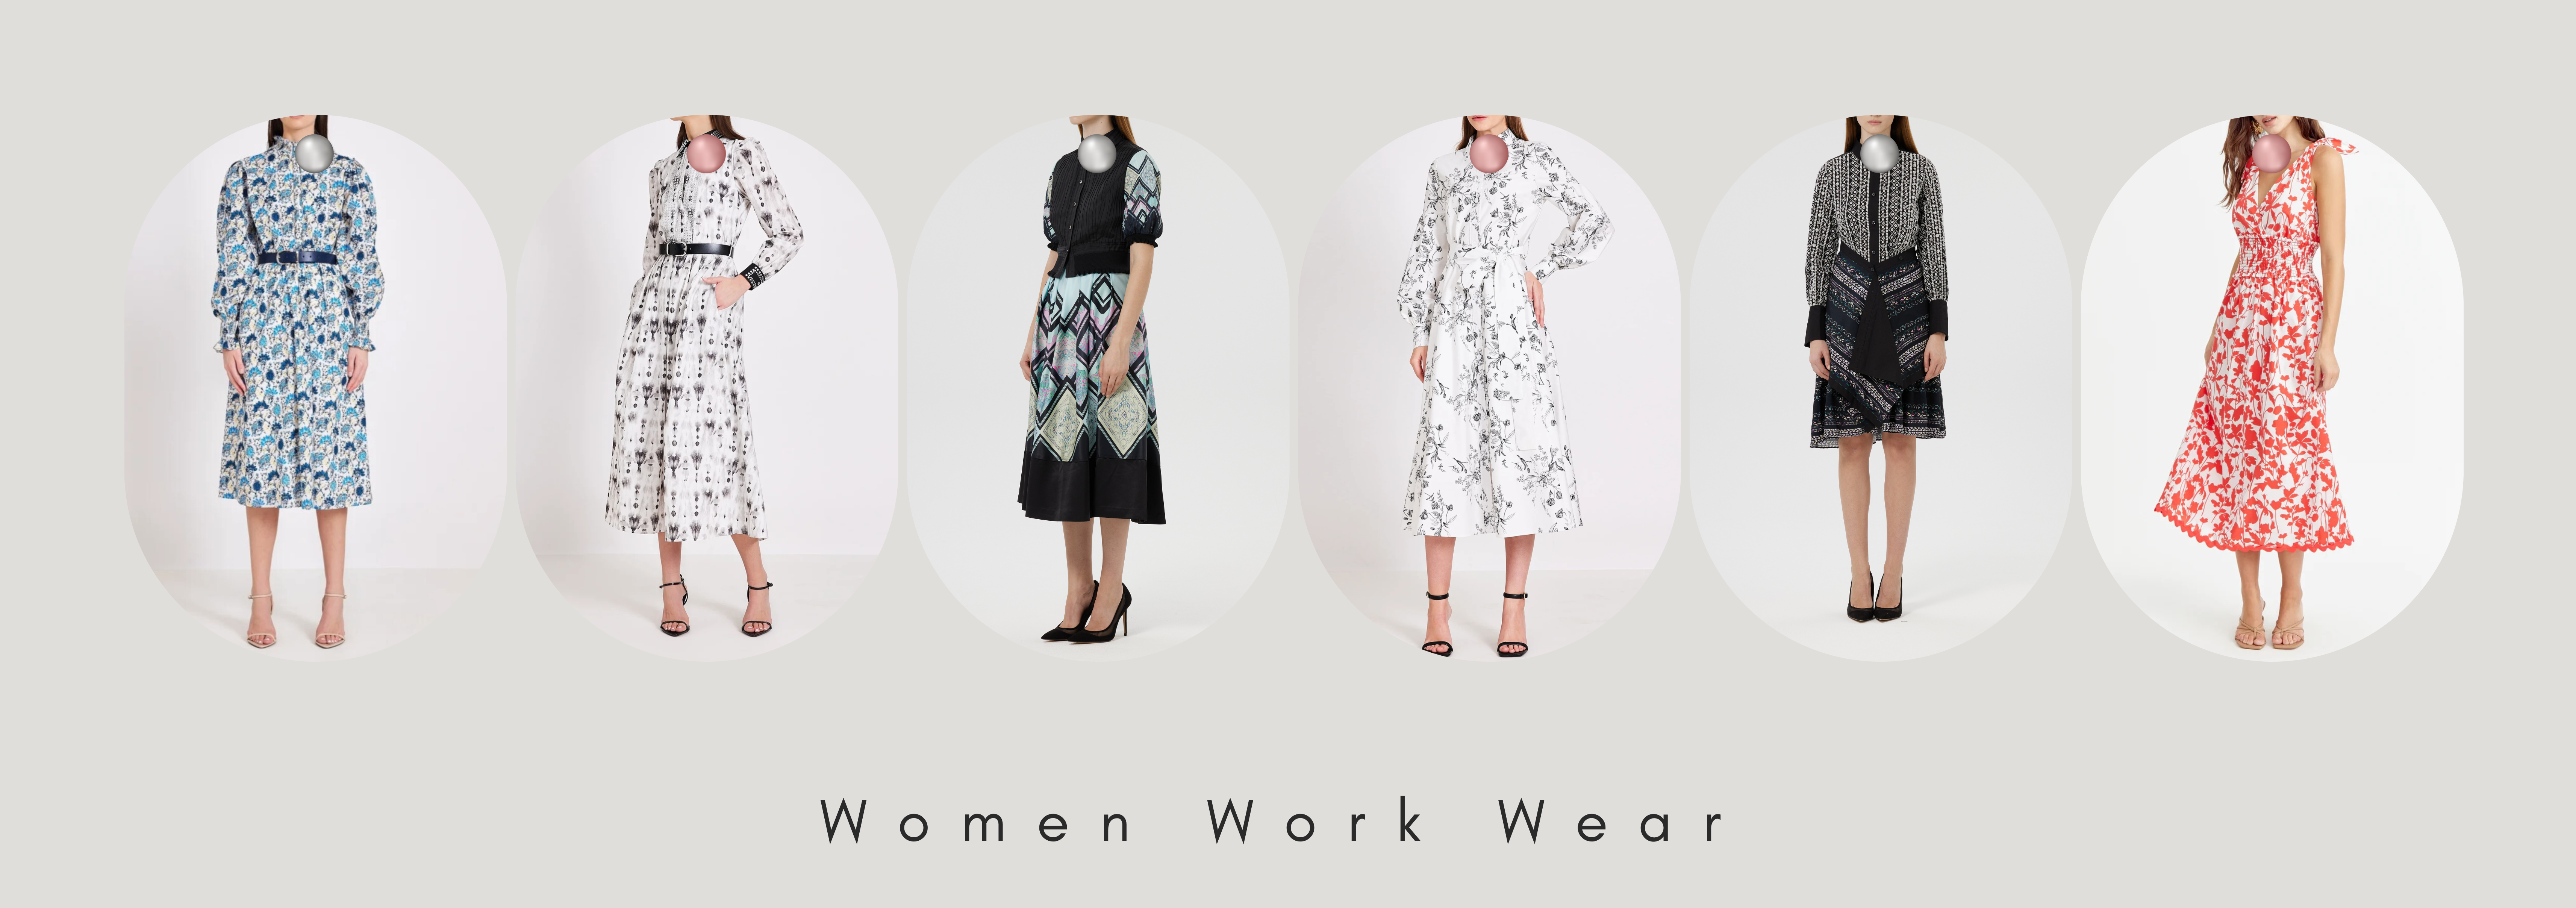 Comprehensive Guide to Women's Work Wear